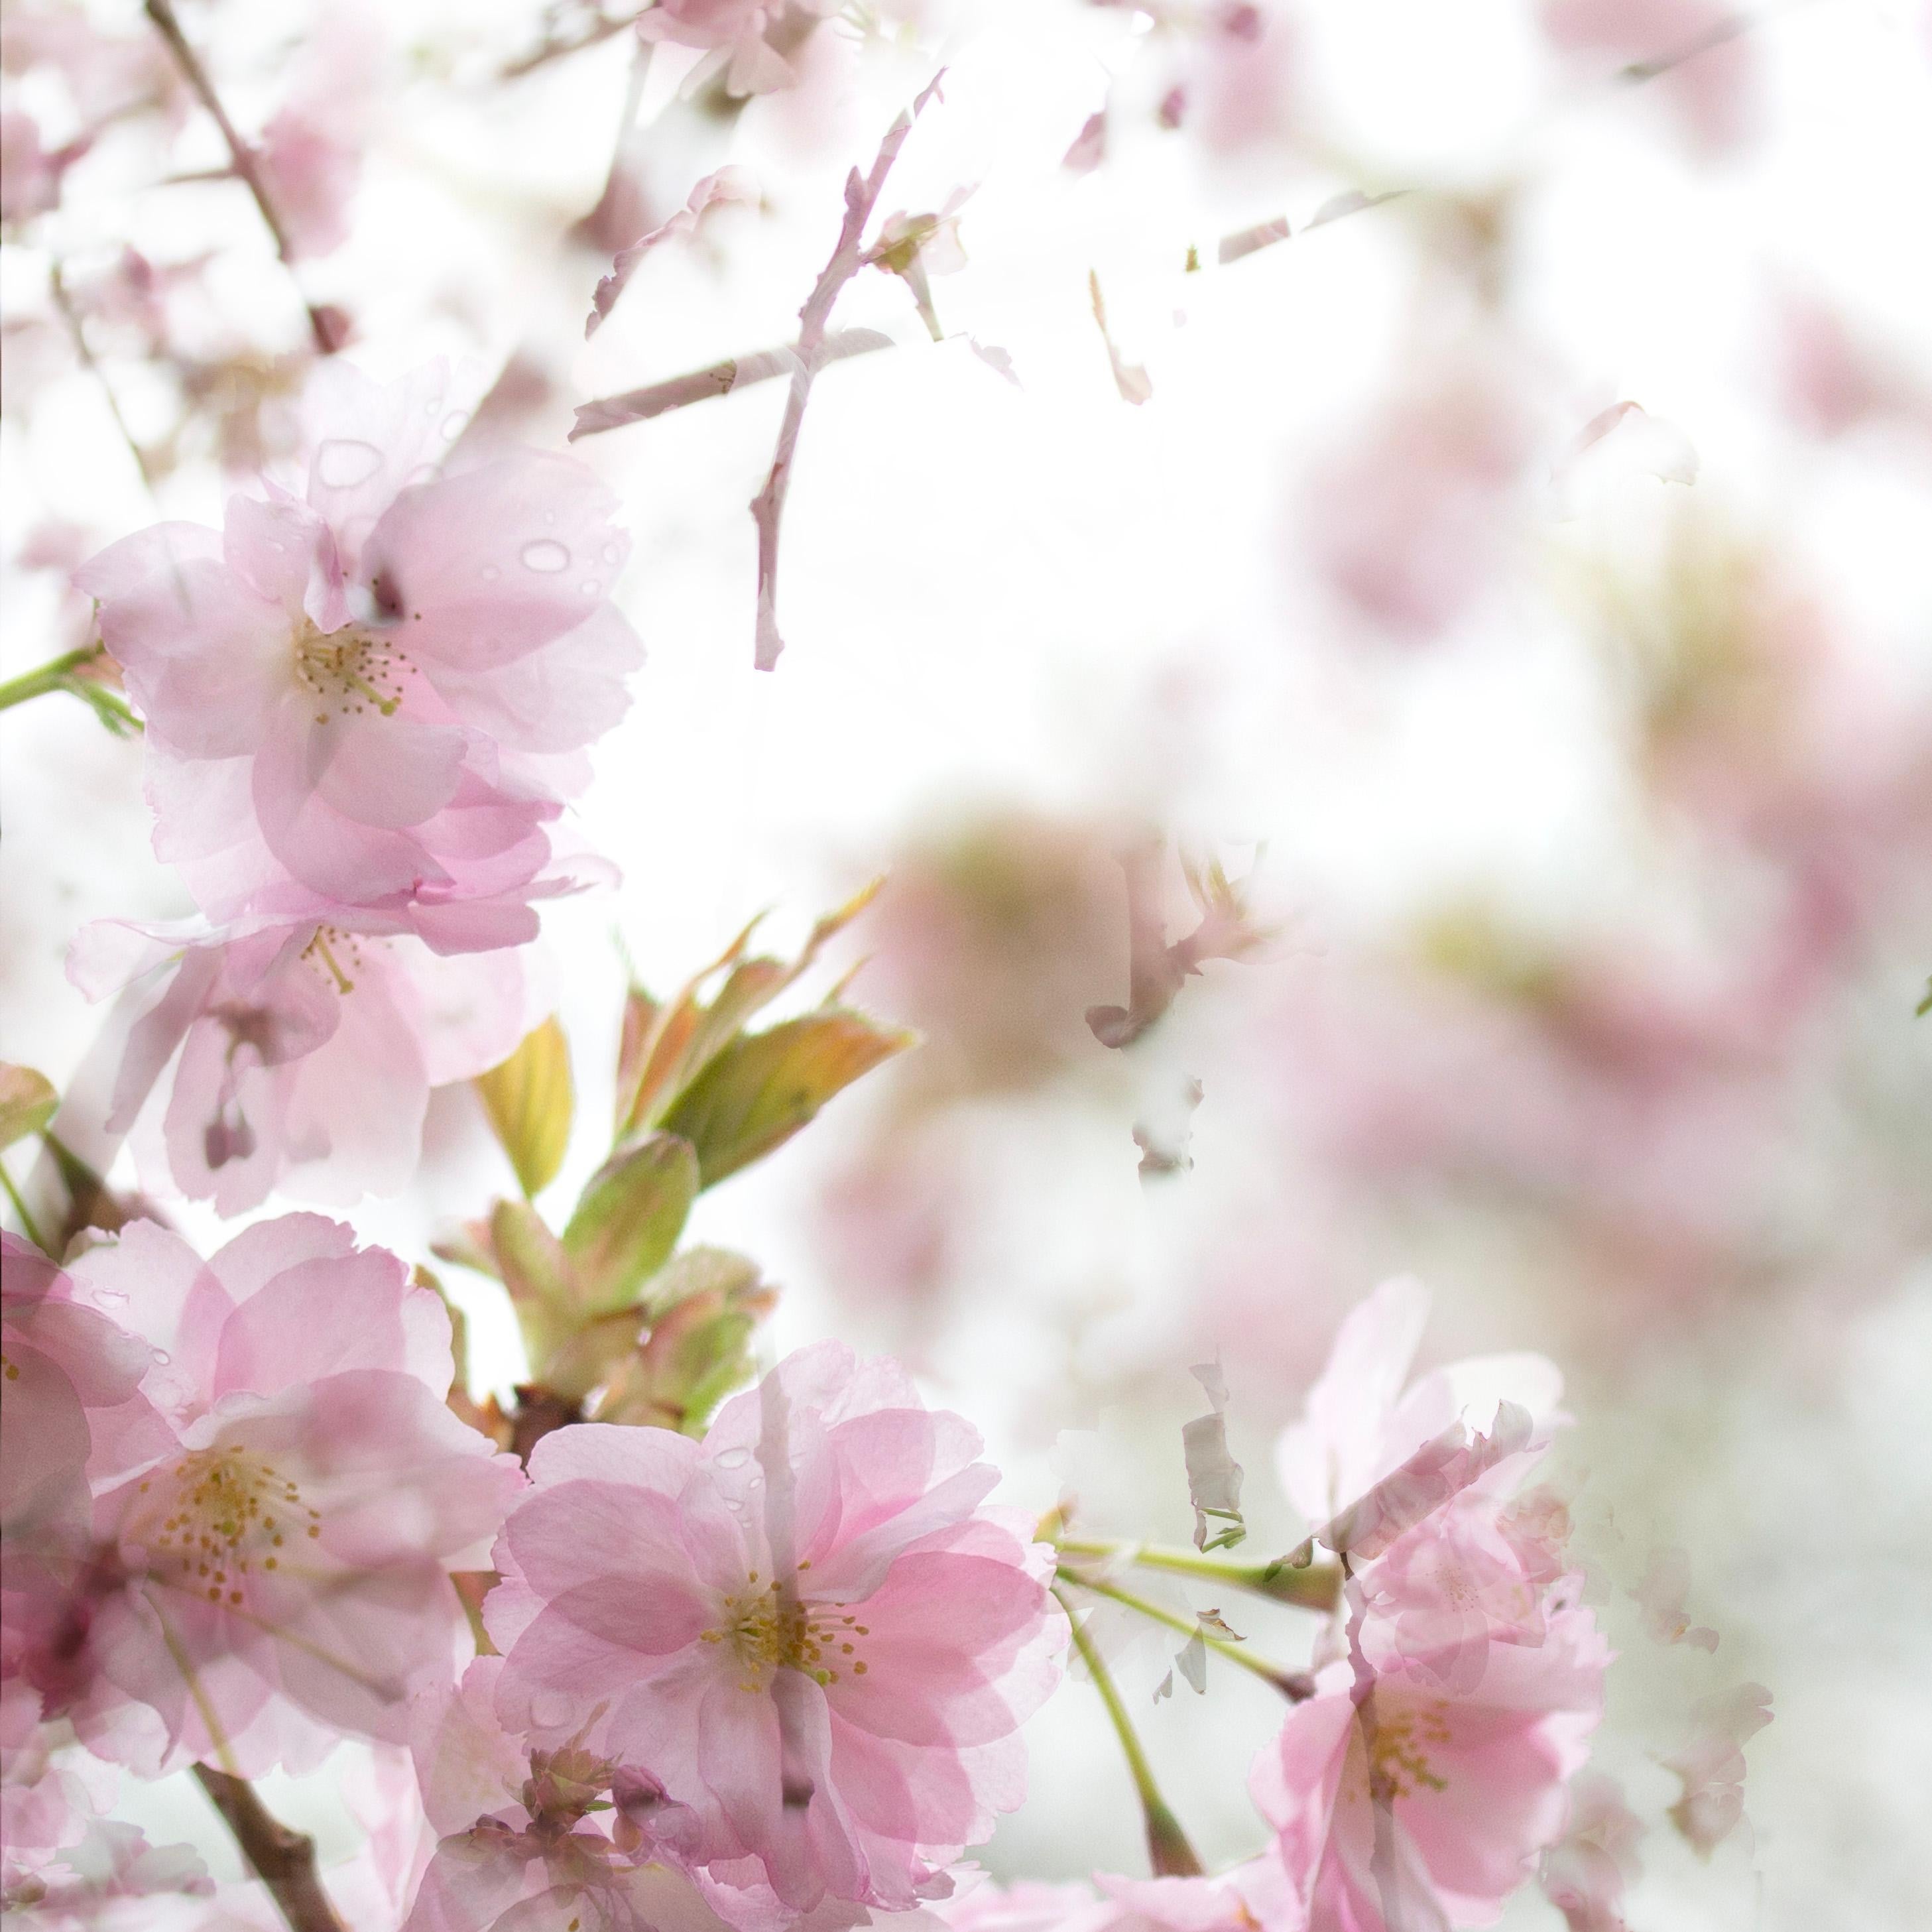 'The Optimism of Spring' Large Scale Photo Cherry blossom Sakura flowers pink - Contemporary Photograph by Sophia Milligan